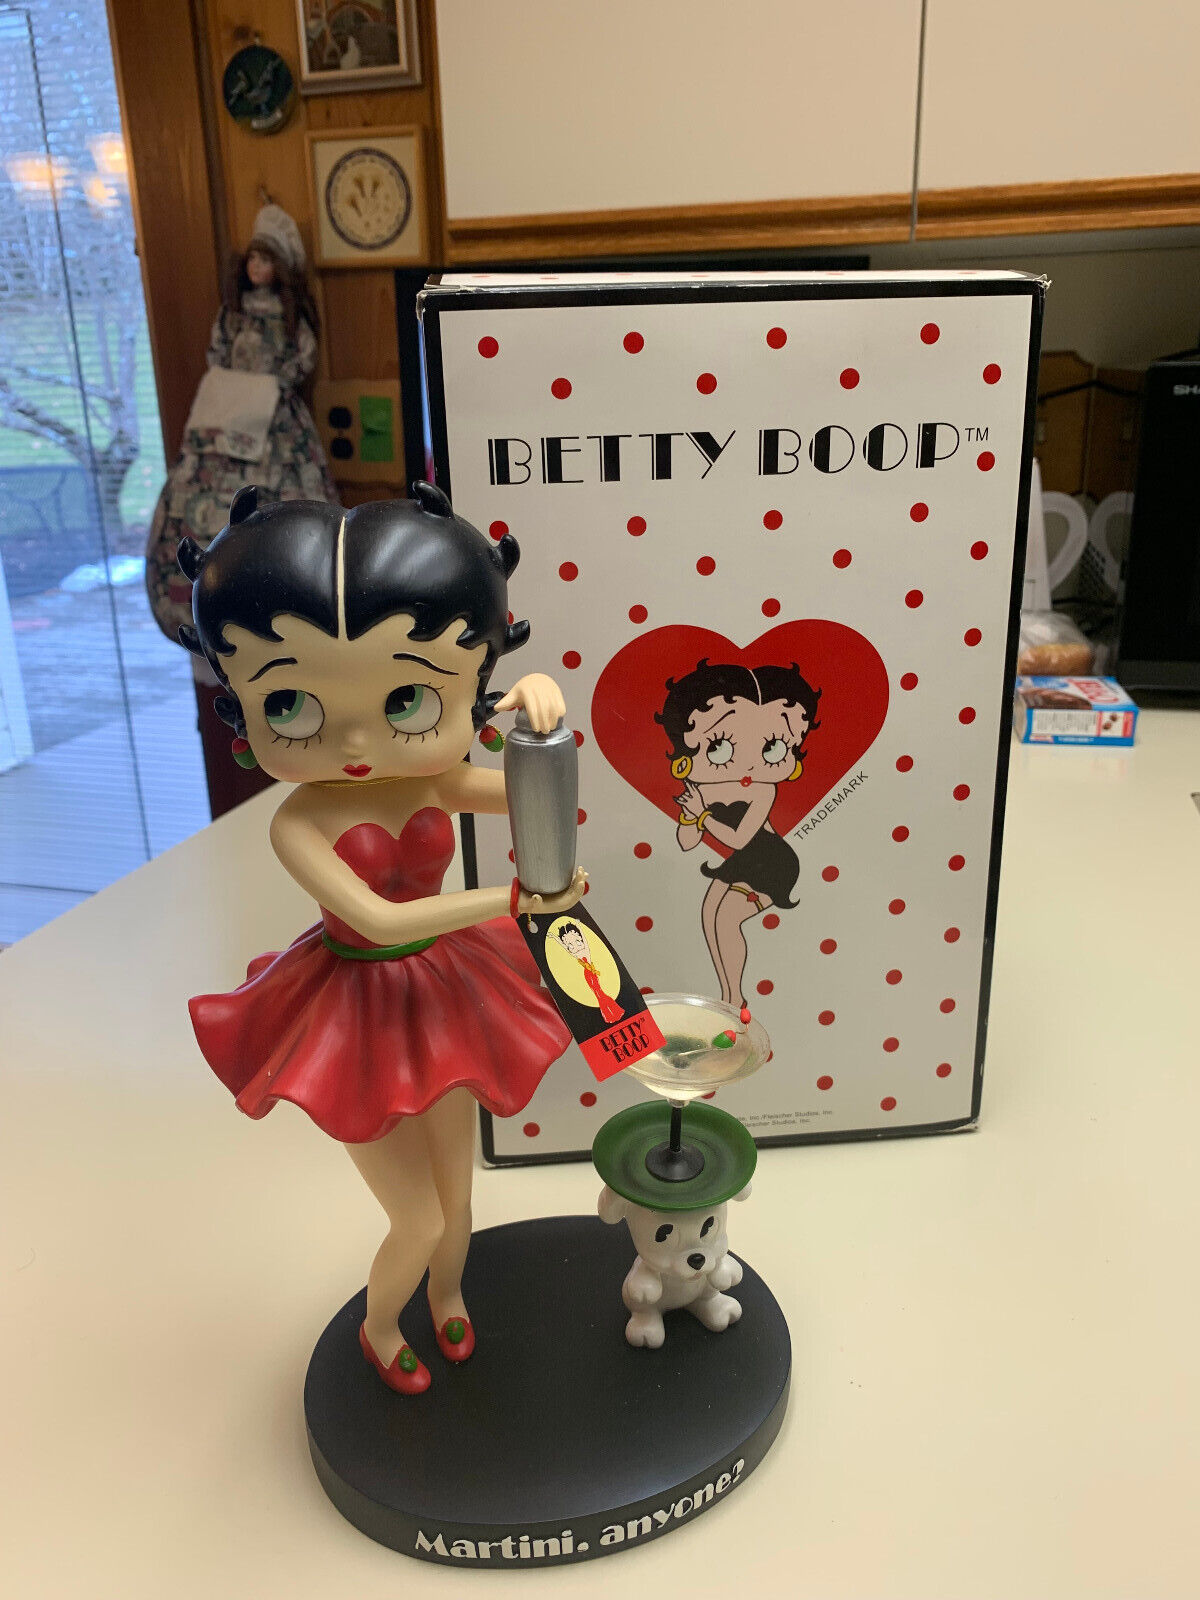 BETTY BOOP Martini novelty gifts and Collectible 